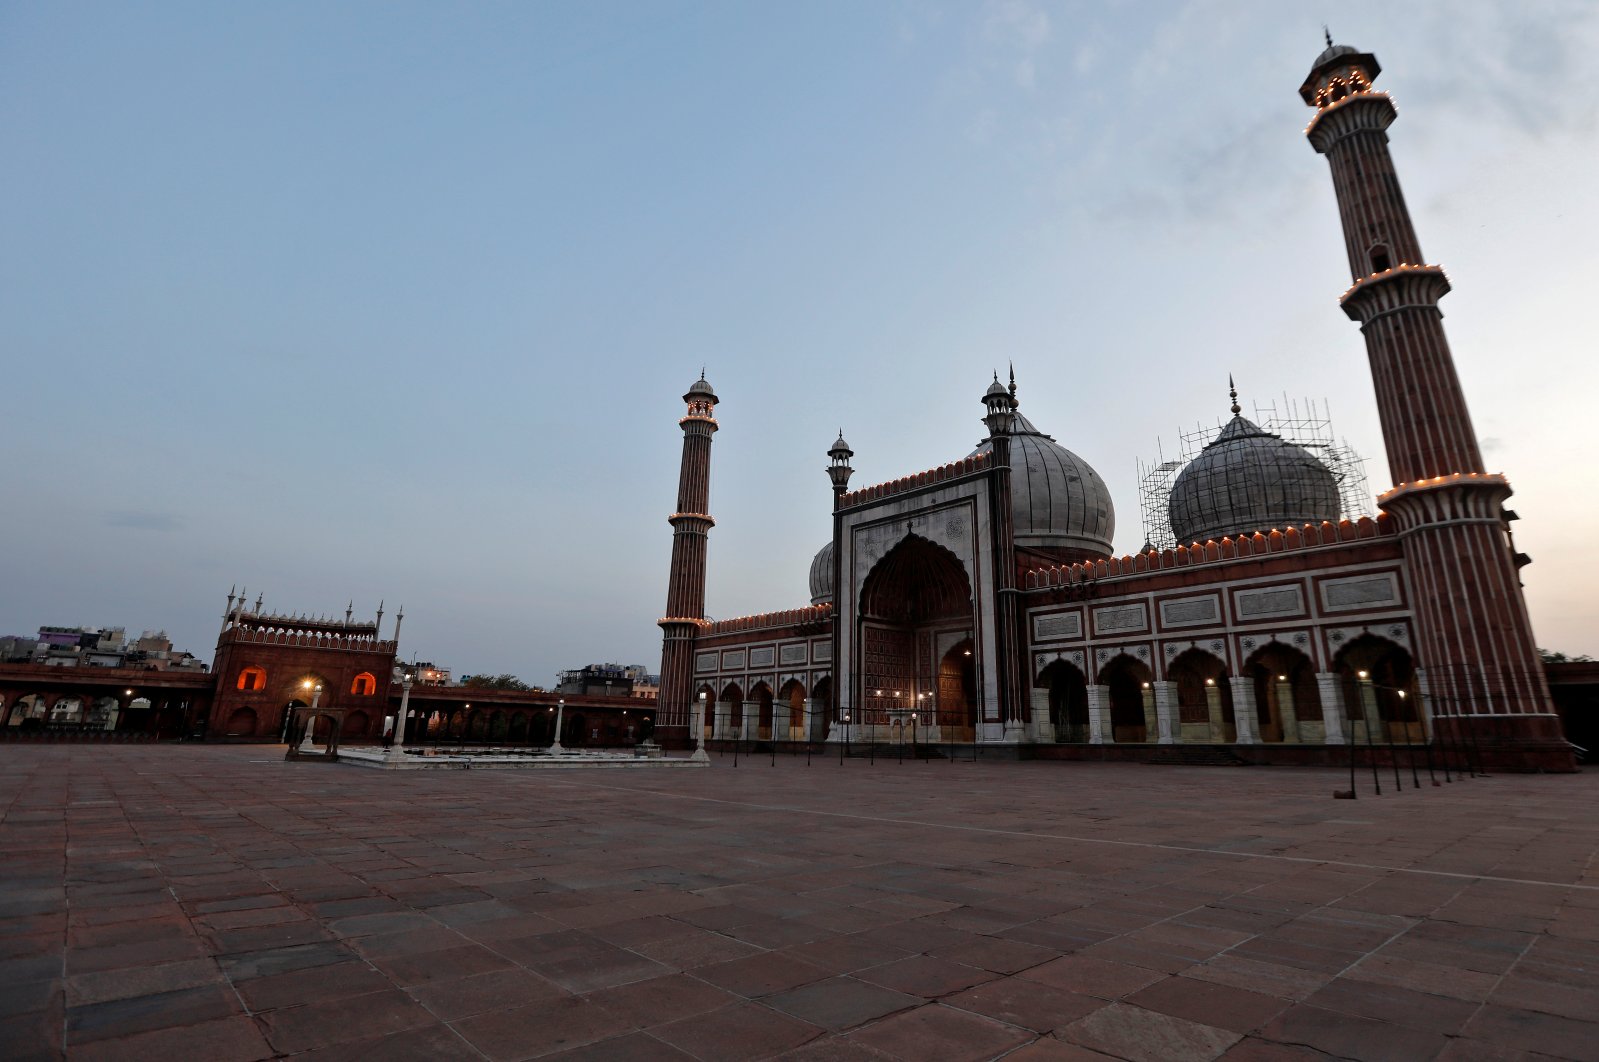 An empty view of Jama Masjid is seen at iftar time on the first day of the Muslim fasting month of Ramadan in the old quarters of Delhi, India, April 25, 2020. (REUTERS Photo)